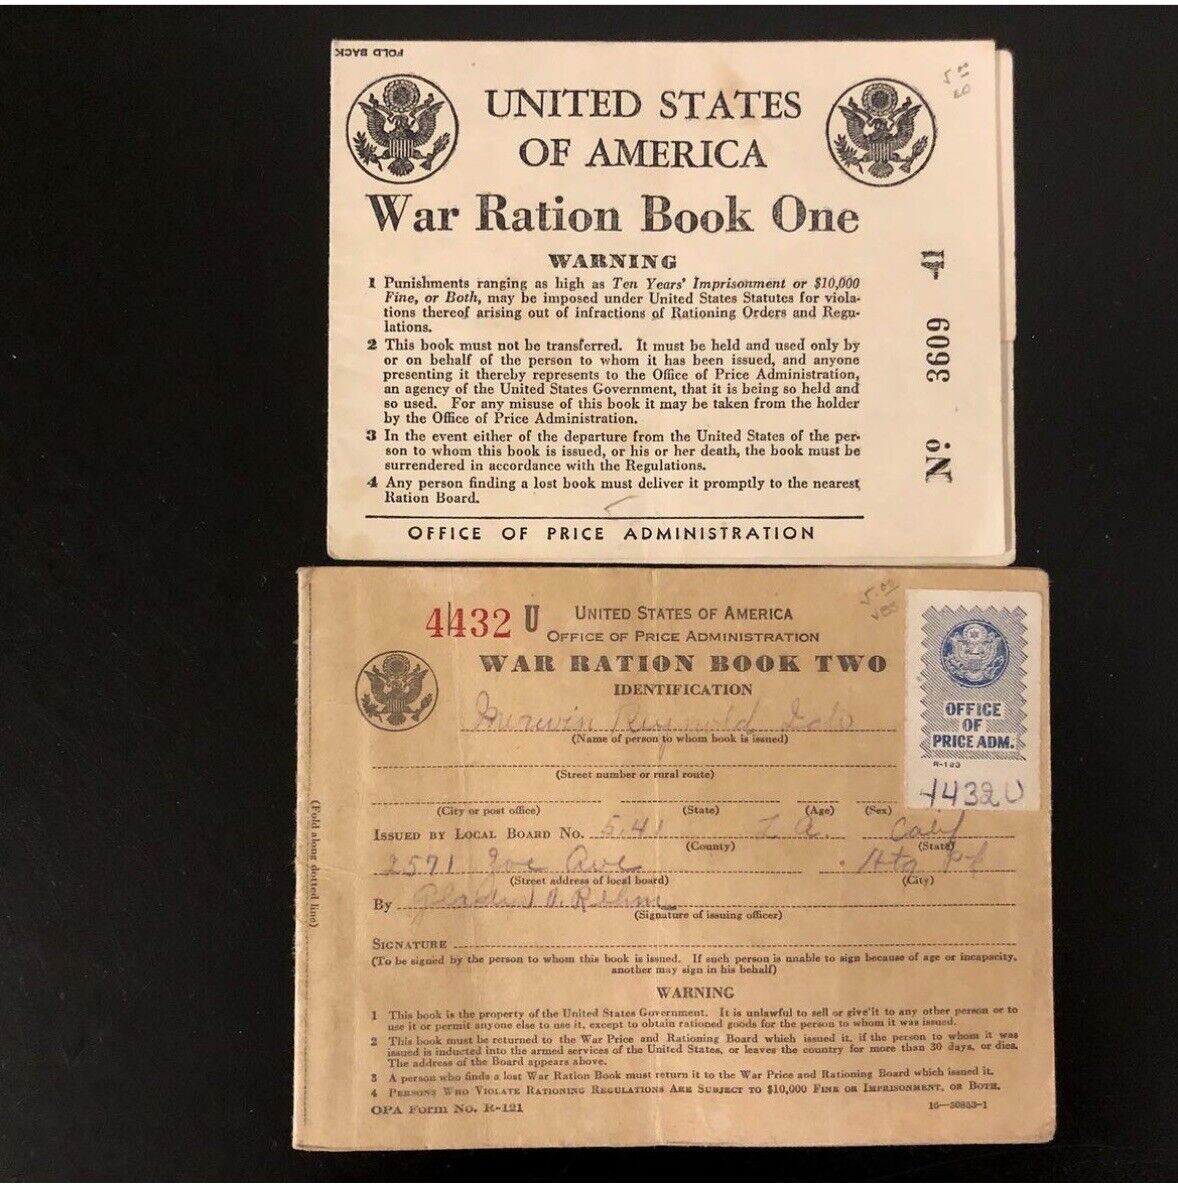 WWII ration book 1942